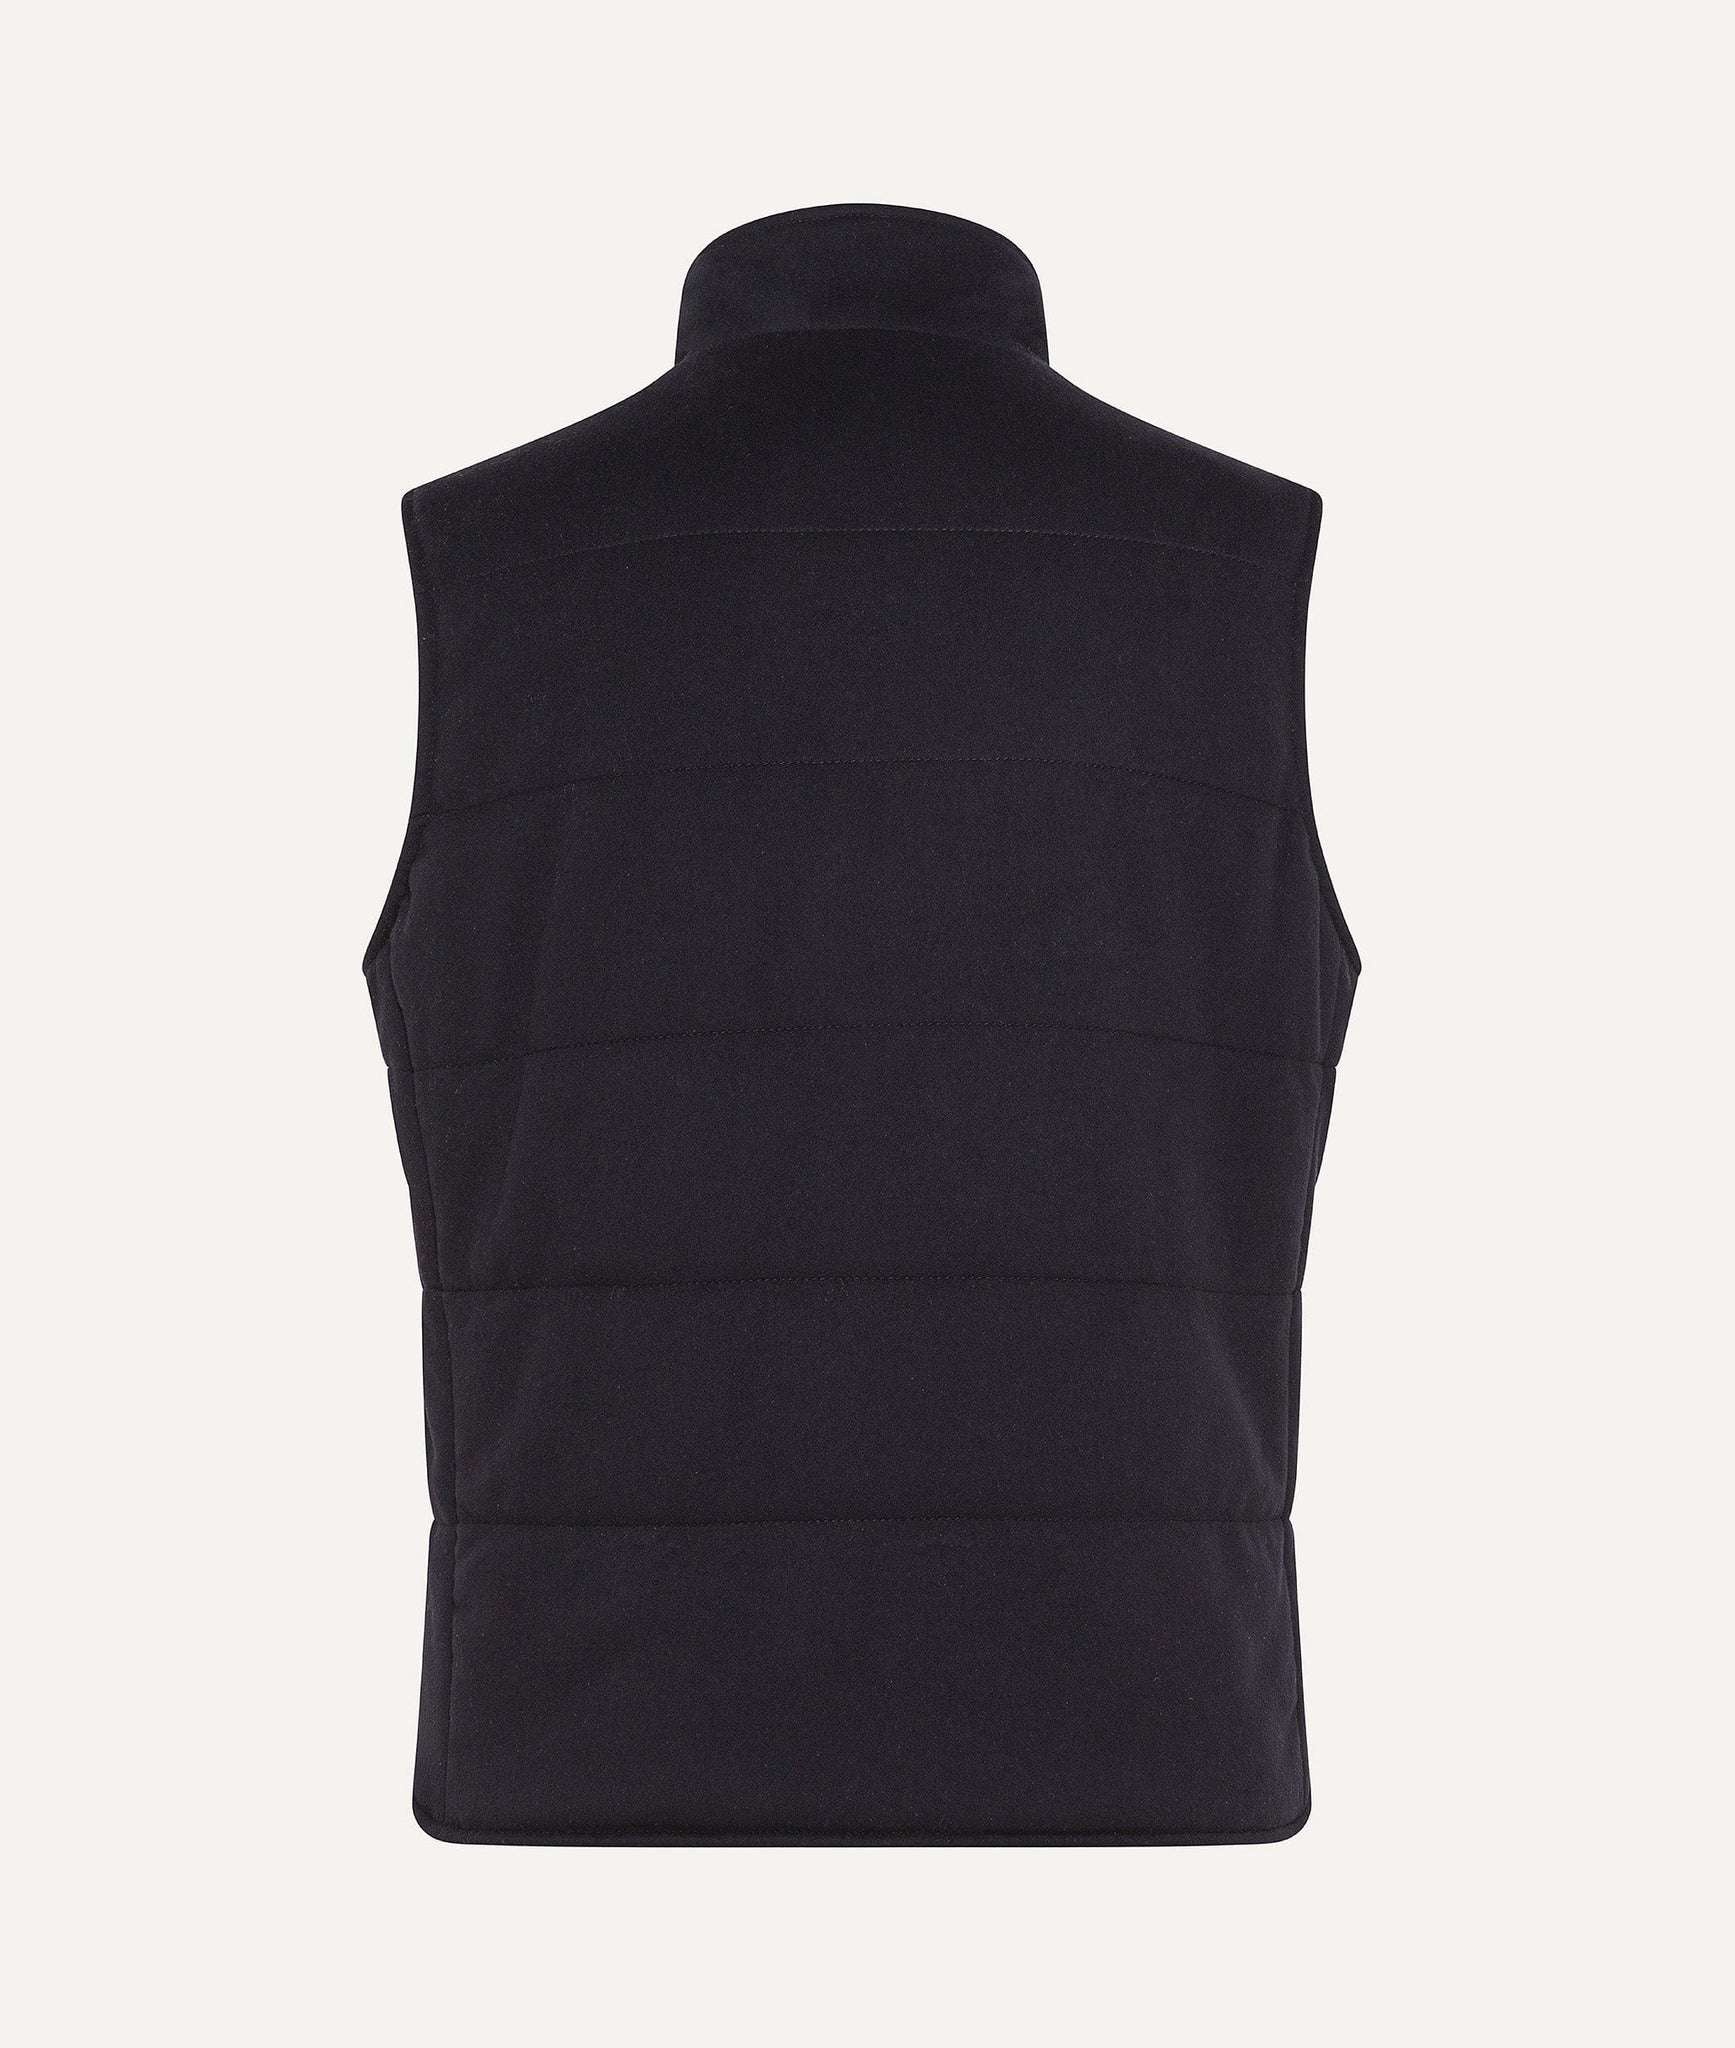 Unlined Gilet in Wool & Cashmere